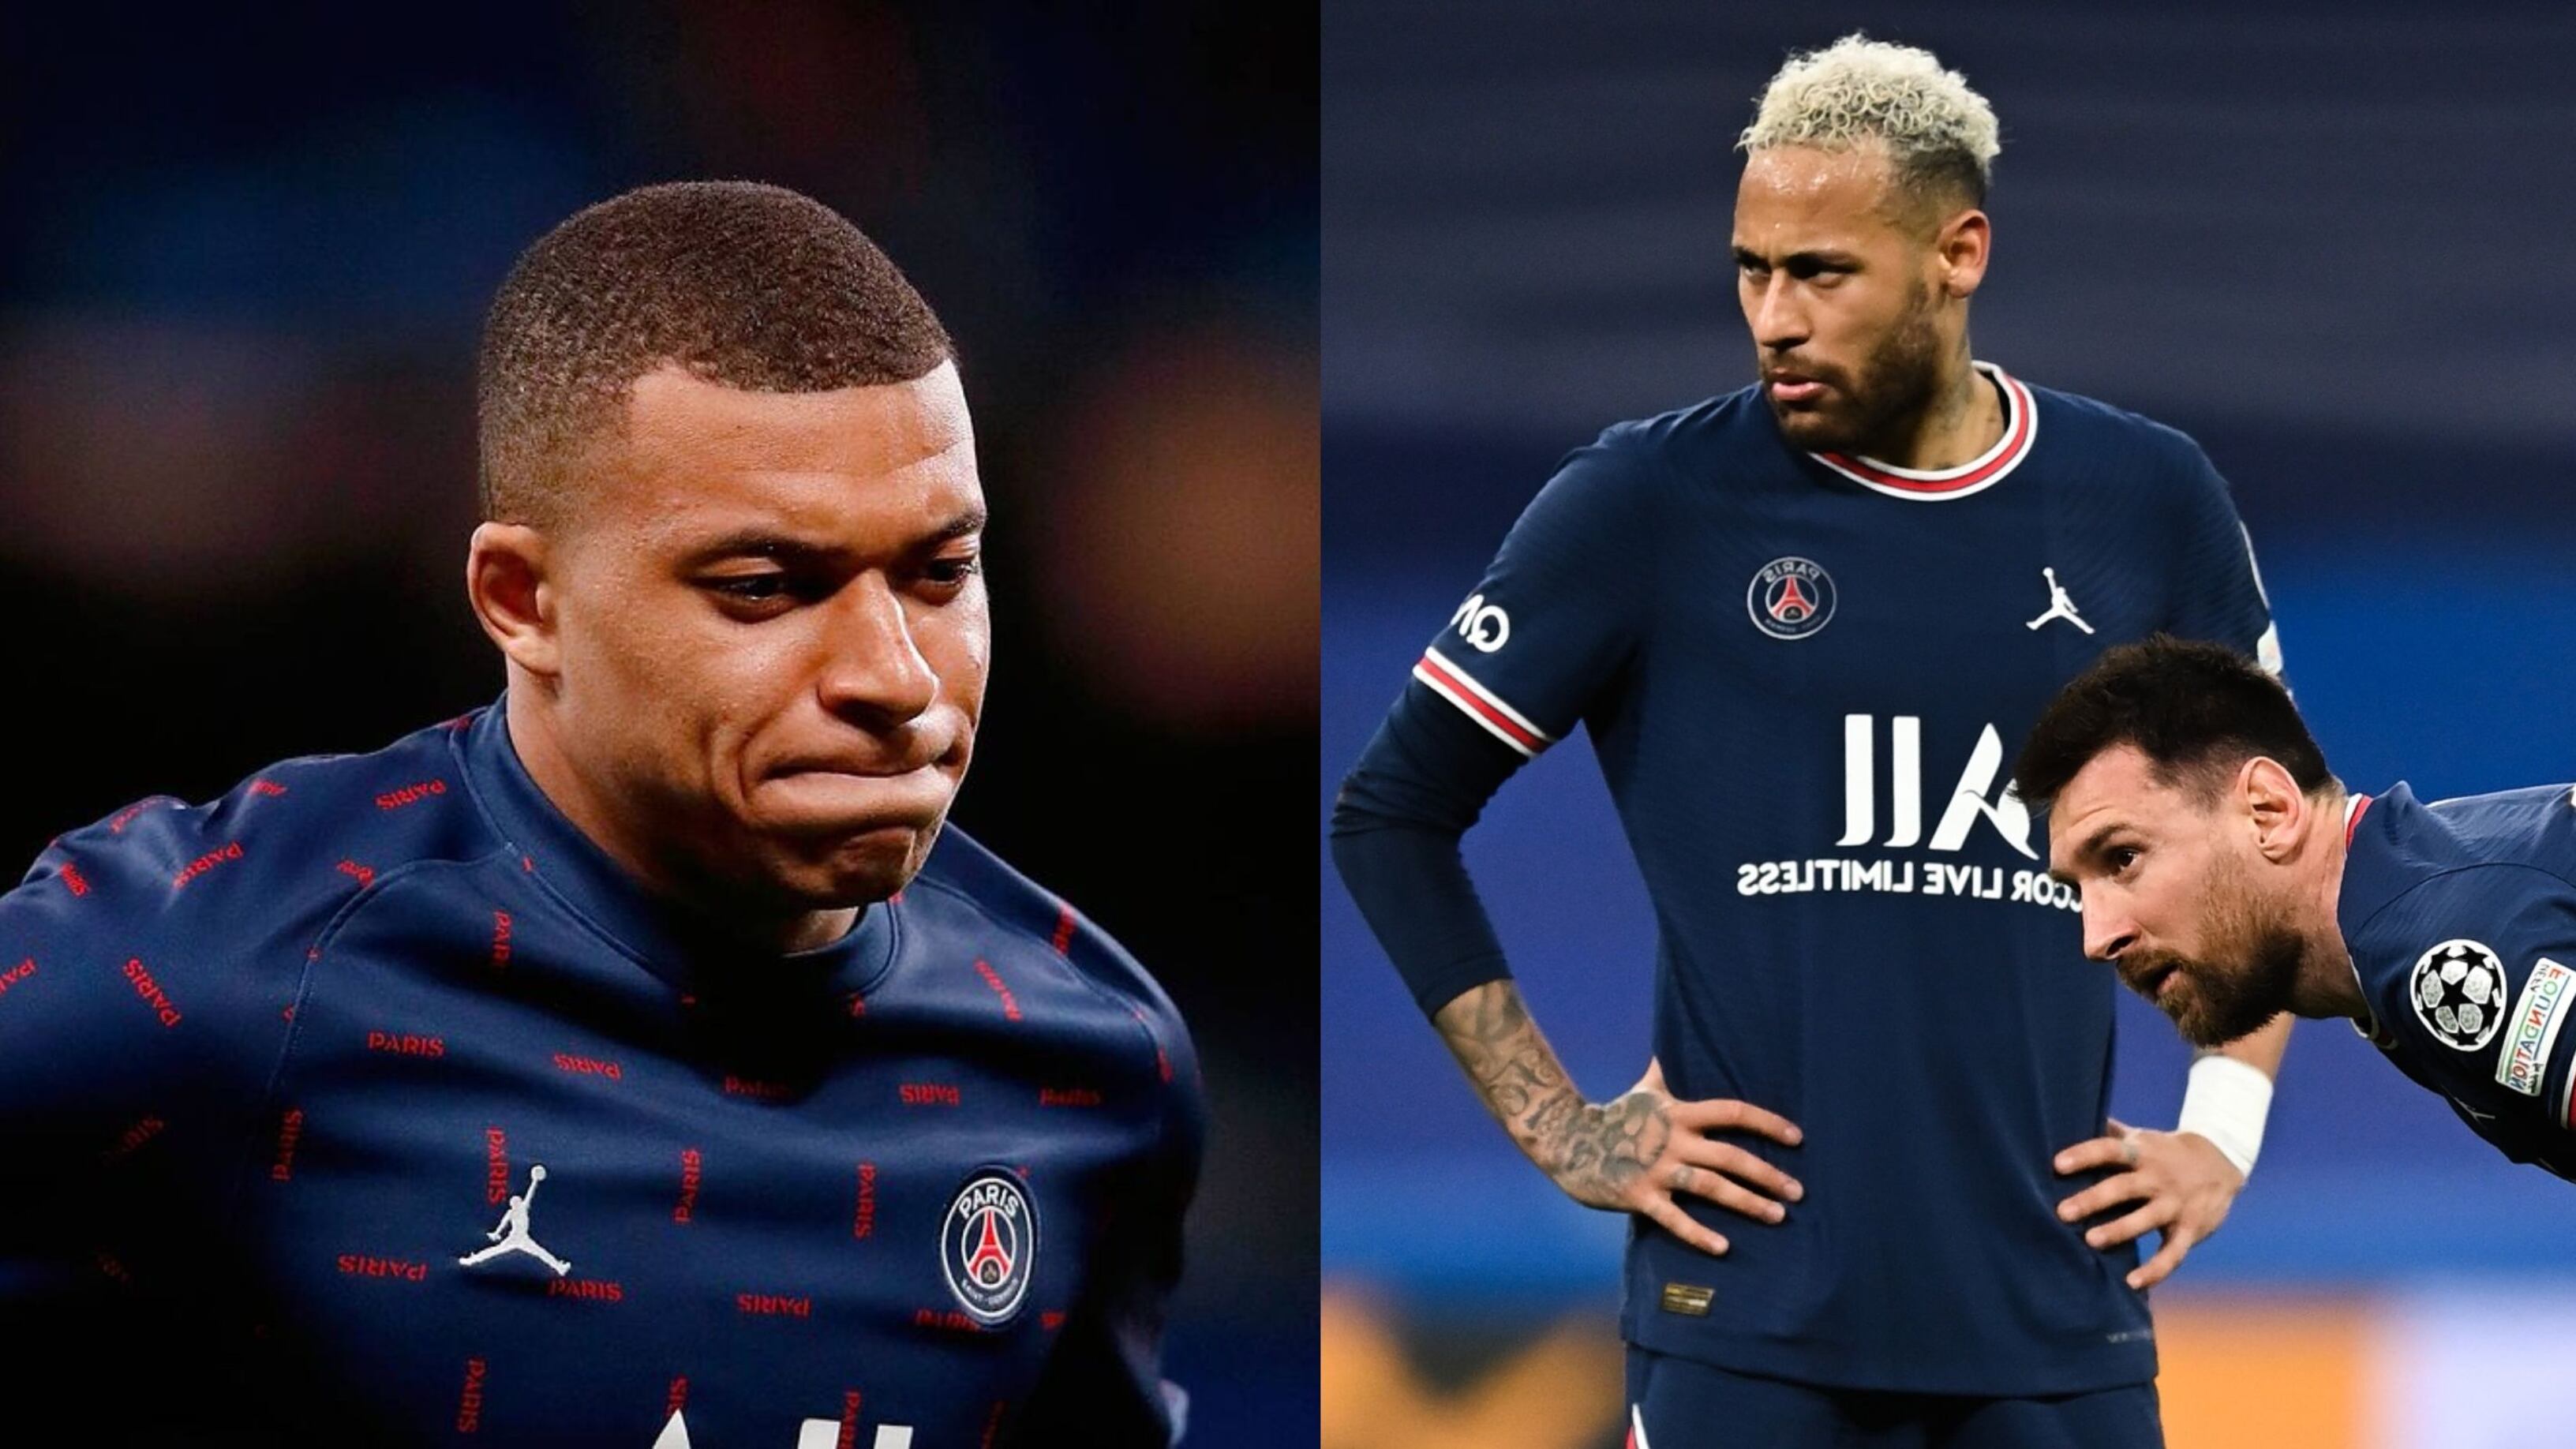 While Mbappe wants to kick Neymar out of PSG, the team the Brazilian would go to is revealed